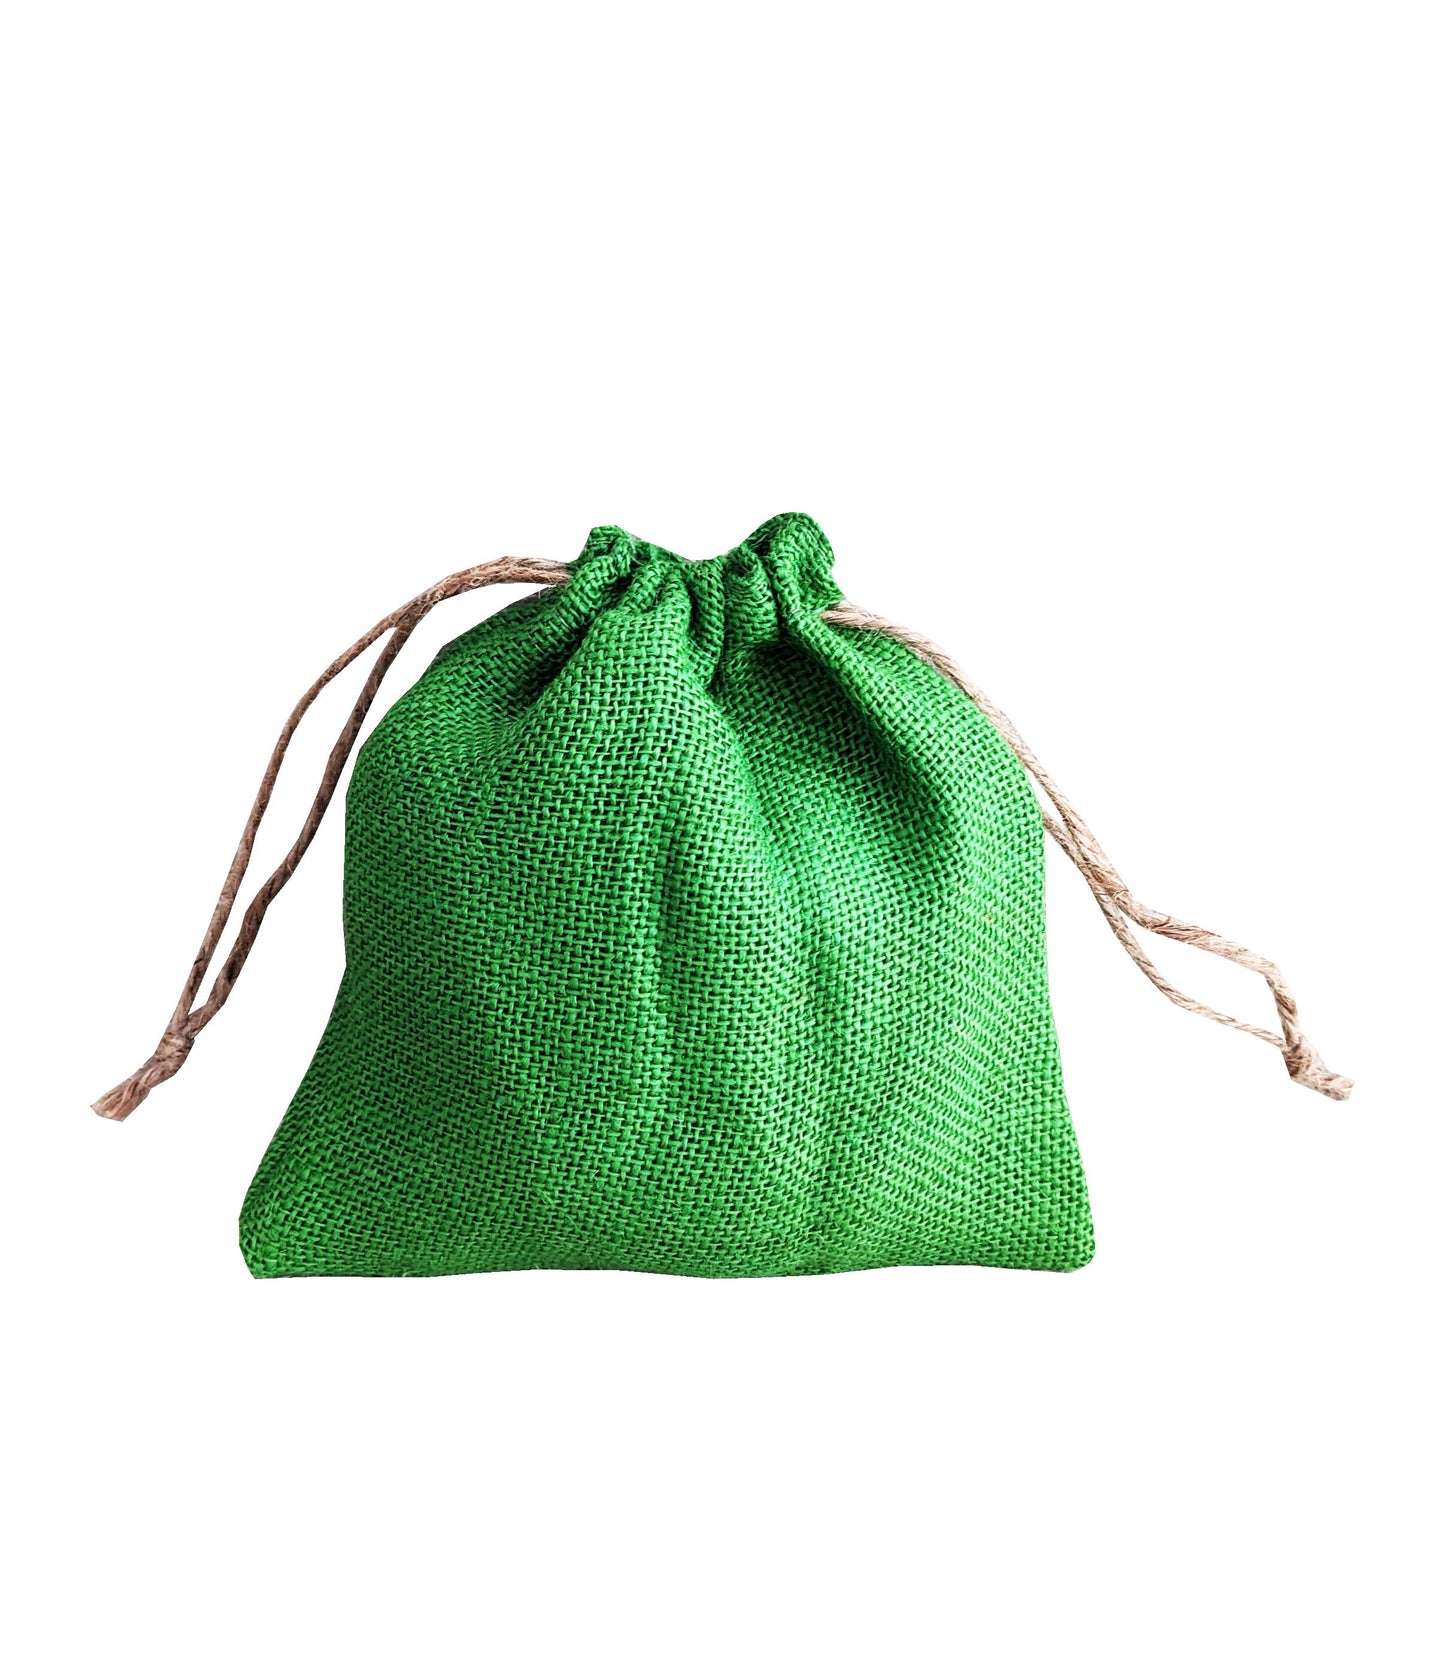 Handmakes Natural Pure Green Jute Gift Potli Bags 7X8 Gift Pouches